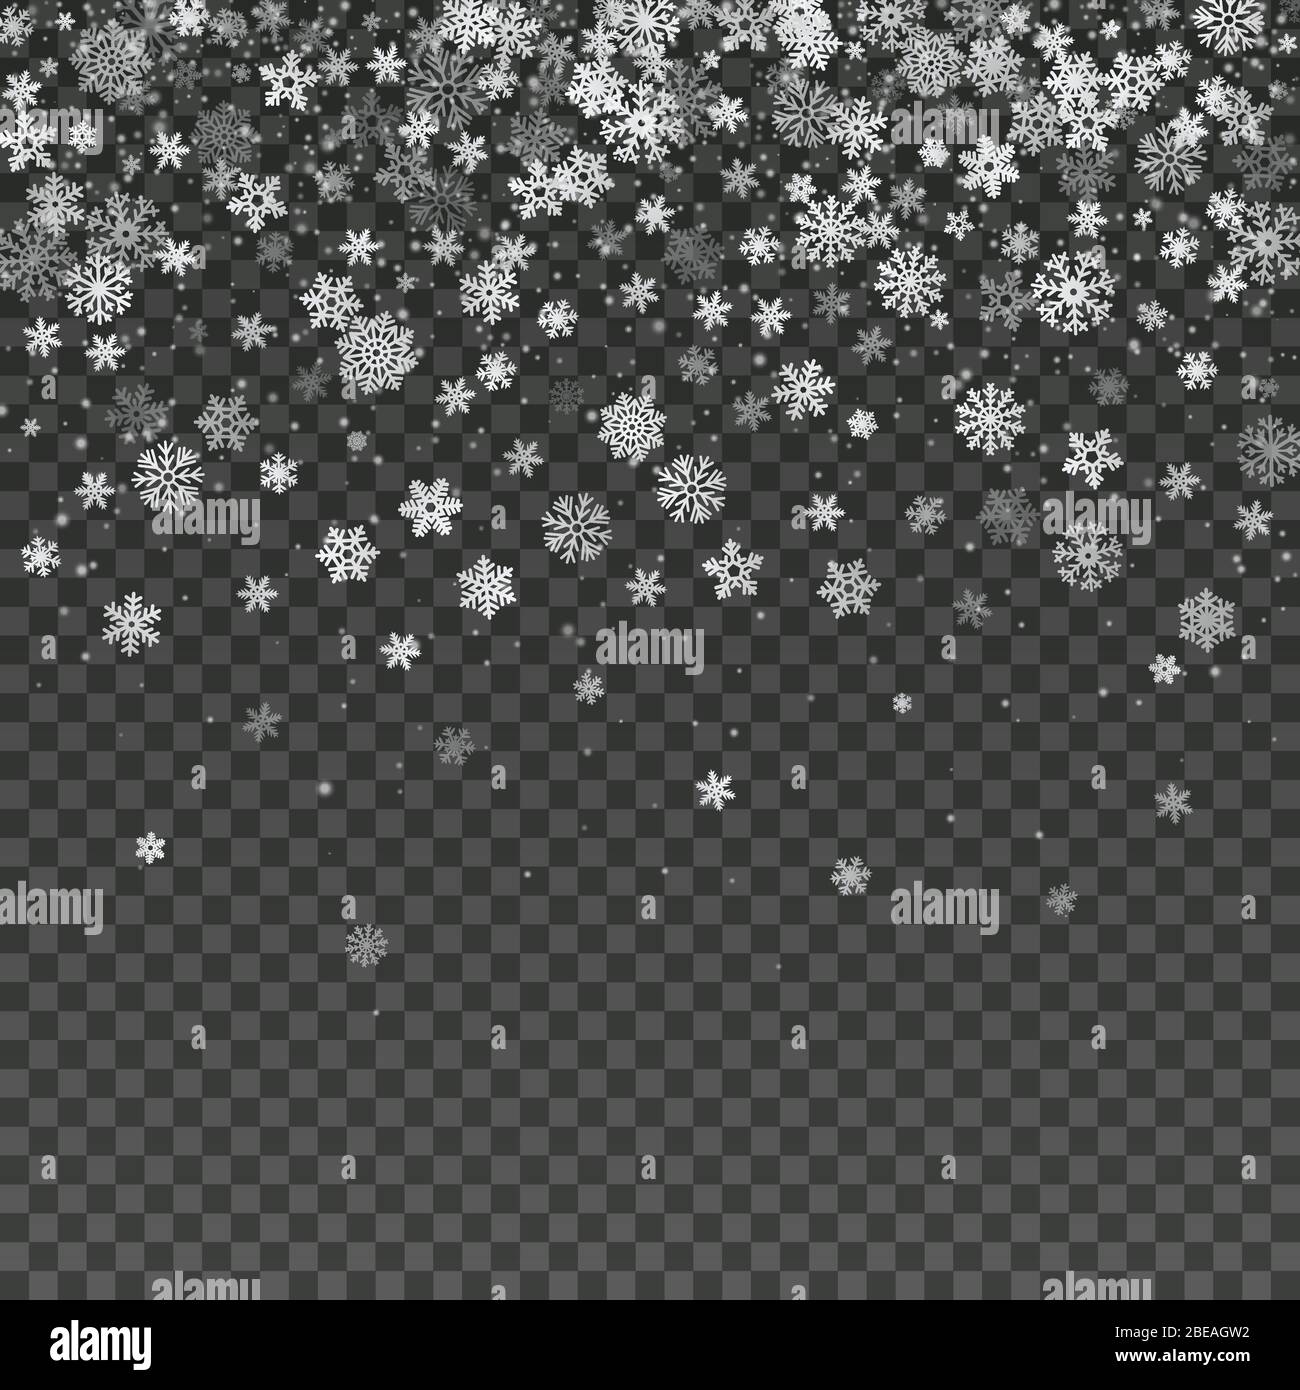 Falling snowflake isolated vector winter decoration wallpaper. Magic christmas snowstorm background. Snowfall transparent wintertime illustration Stock Vector